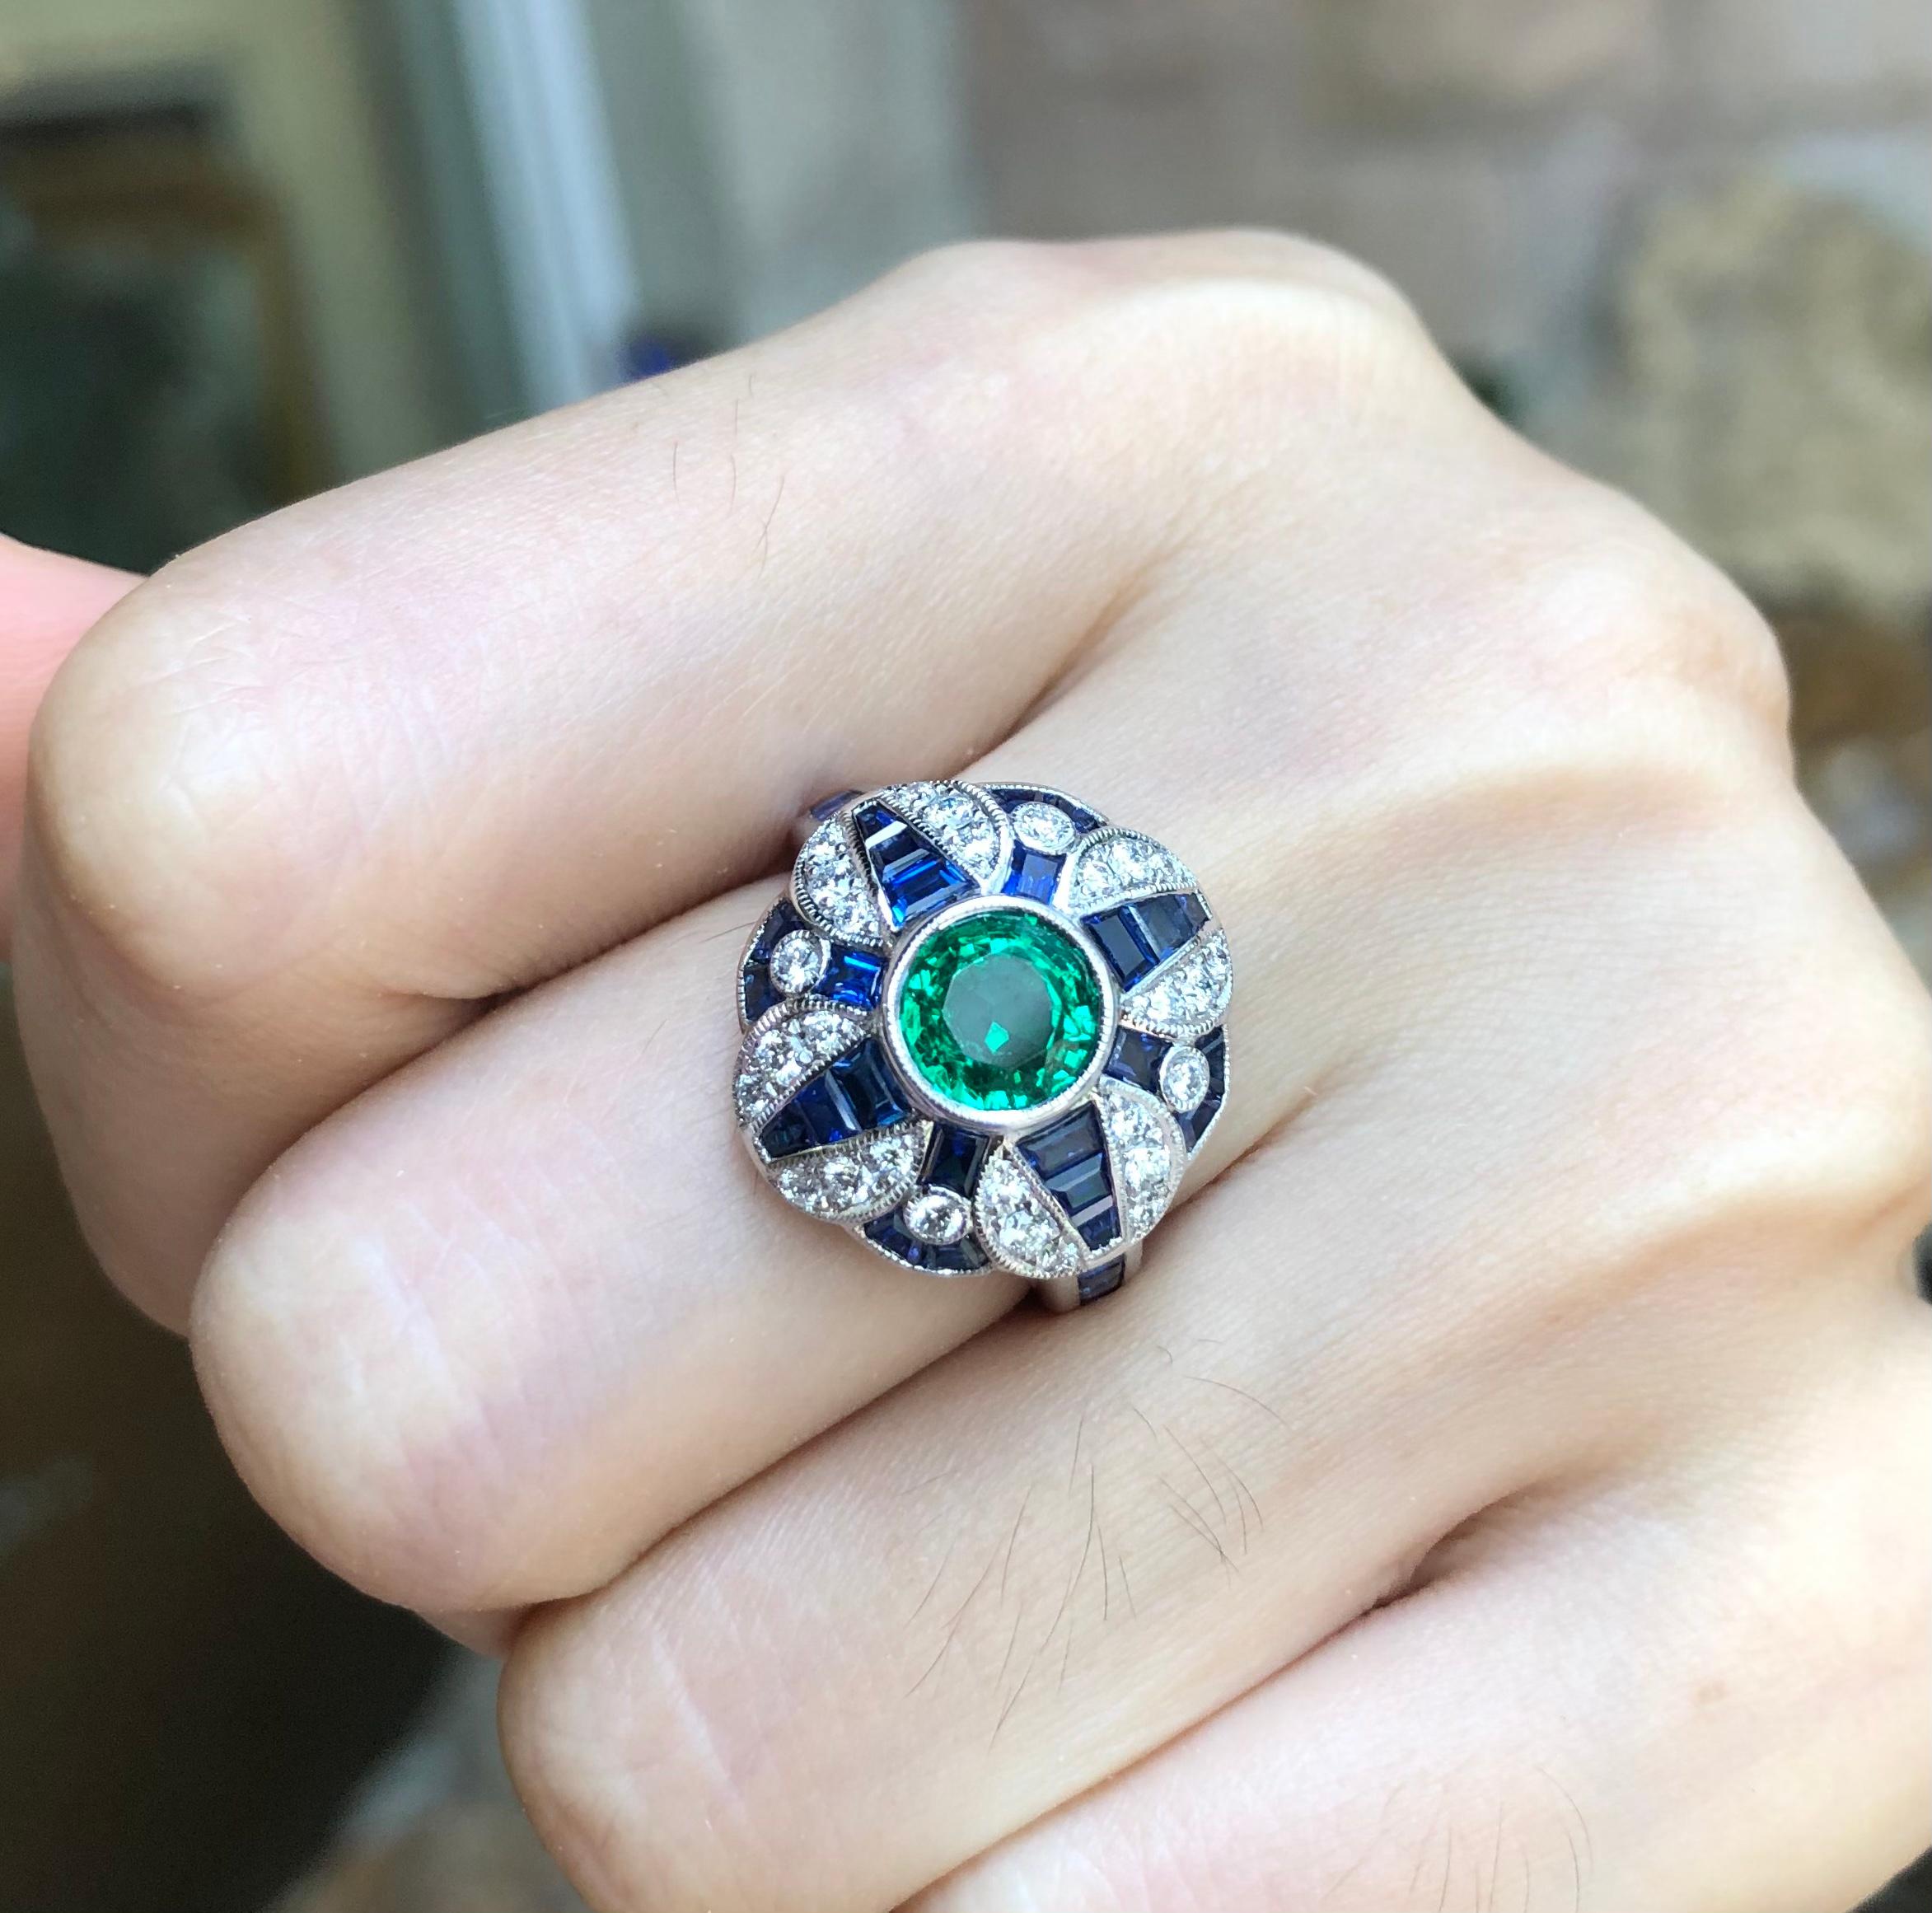 Emerald 0.97 carats with Blue Sapphire 3.42 carats and Diamond  0.34 carat Ring set in 18 Karat White Gold Settings 

Width:  1.7 cm 
Length:  1.7 cm
Ring Size: 53
Total Weight: 7.67 grams

